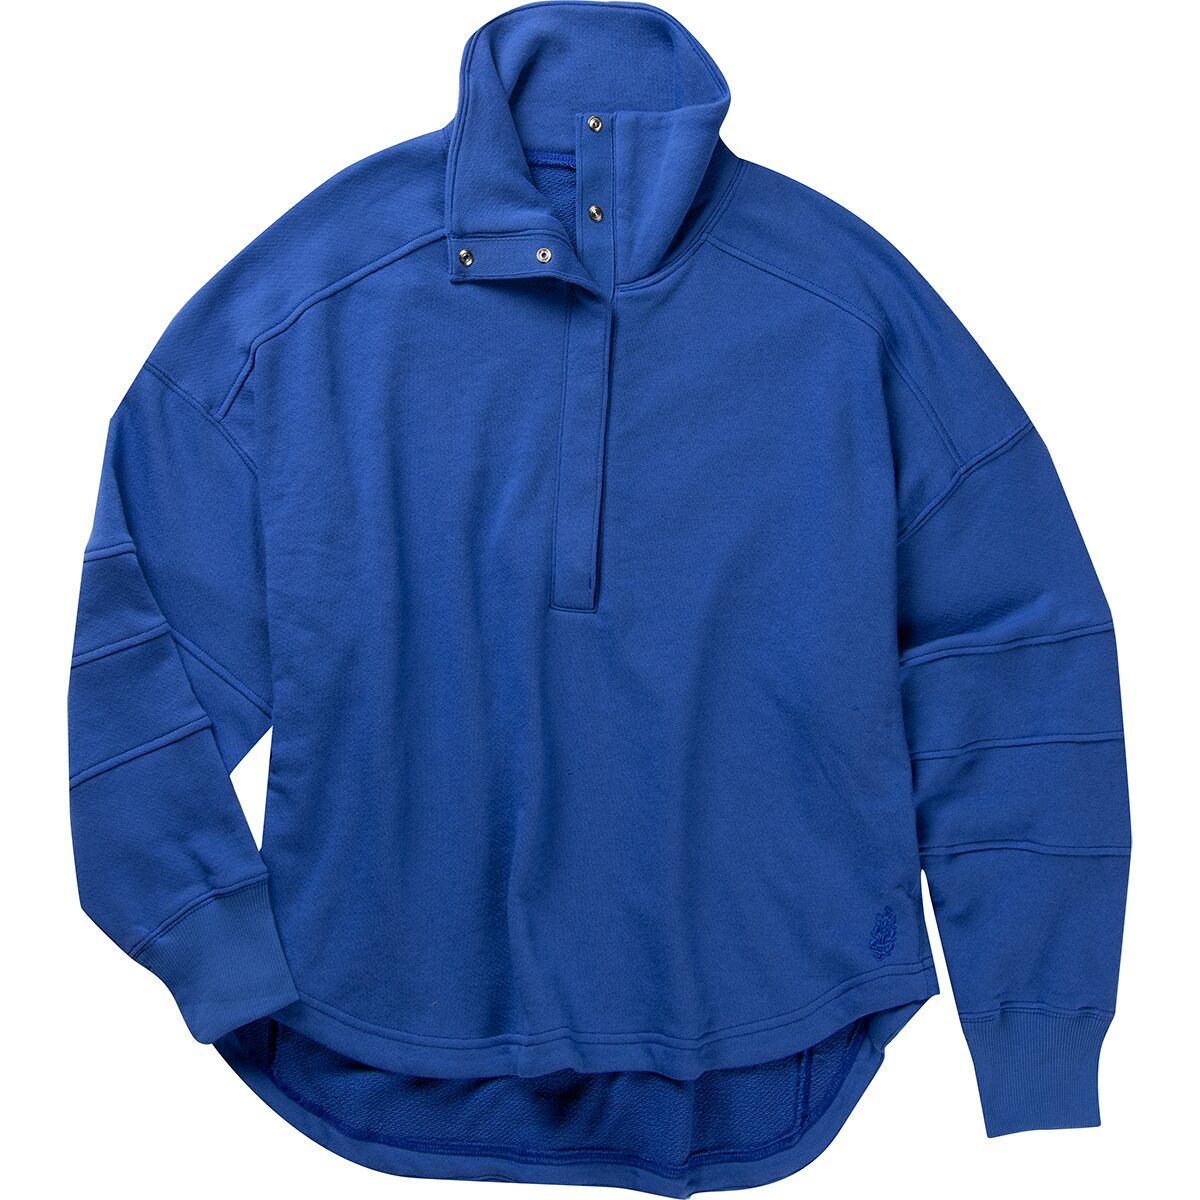 FP Movement Warm Down Pullover - Women's